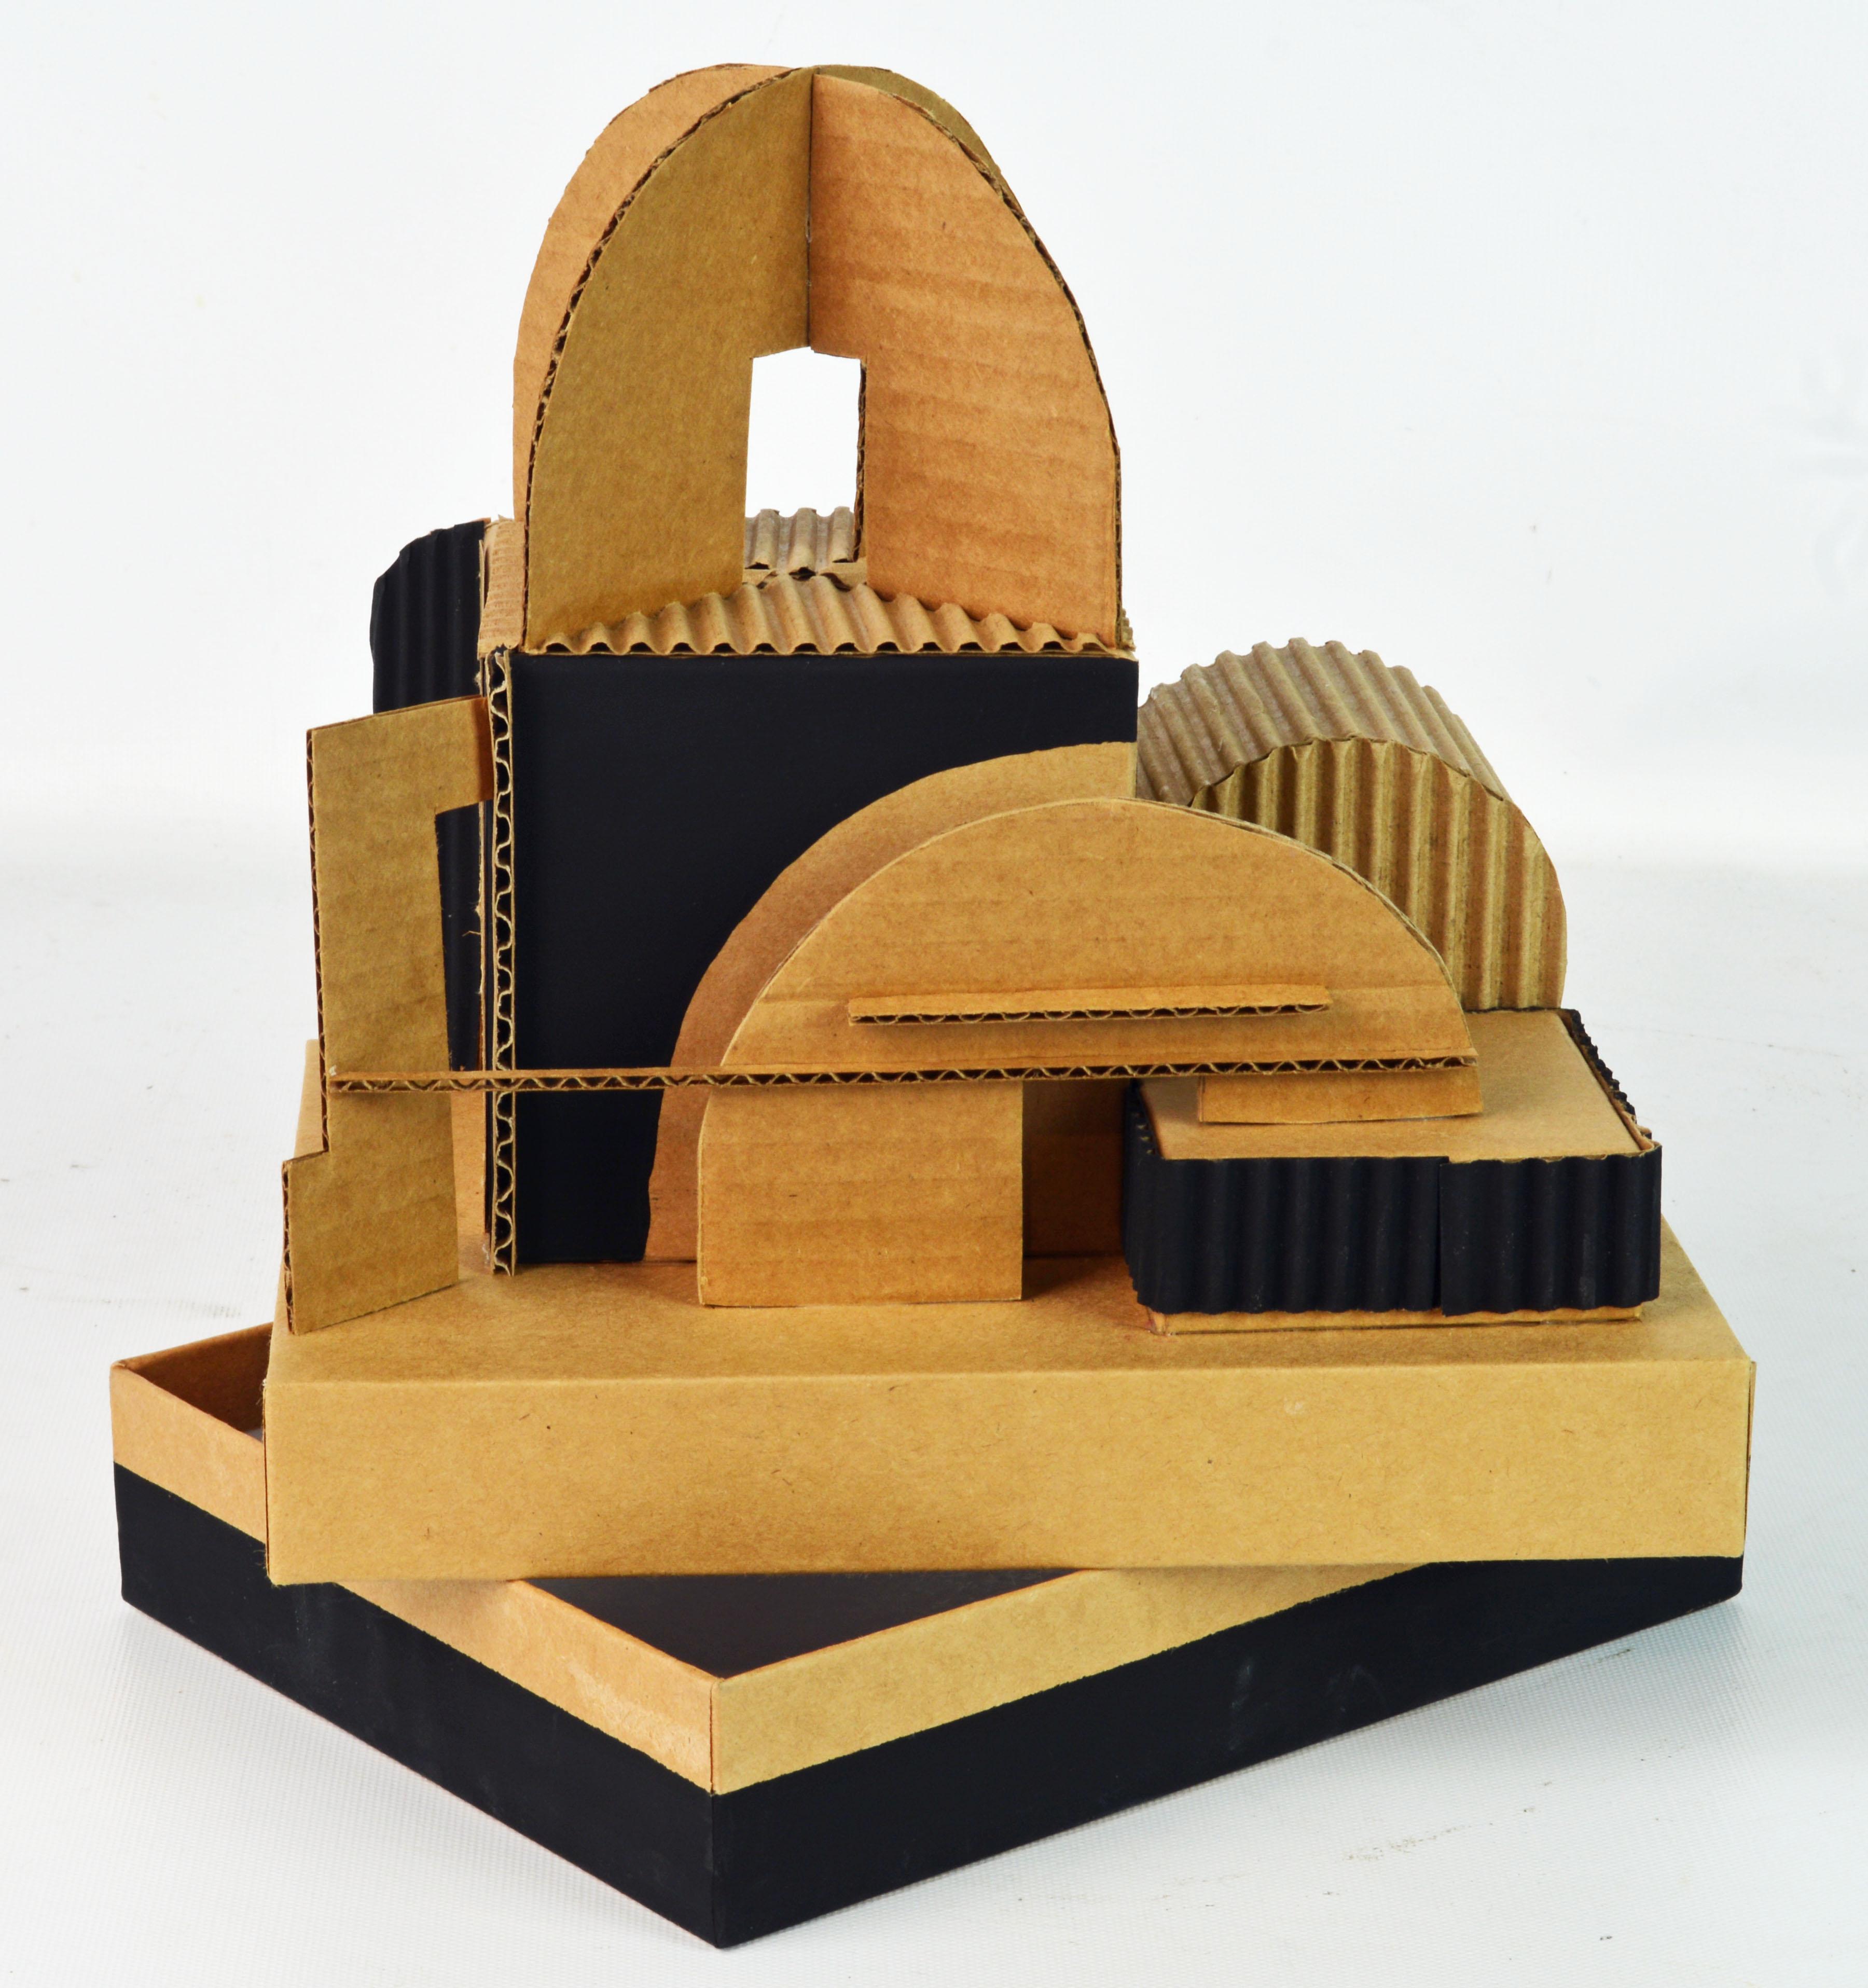 Paper Cubist Bauhaus Style Architectural Cardboard Table Sculpture by Virgil Greca